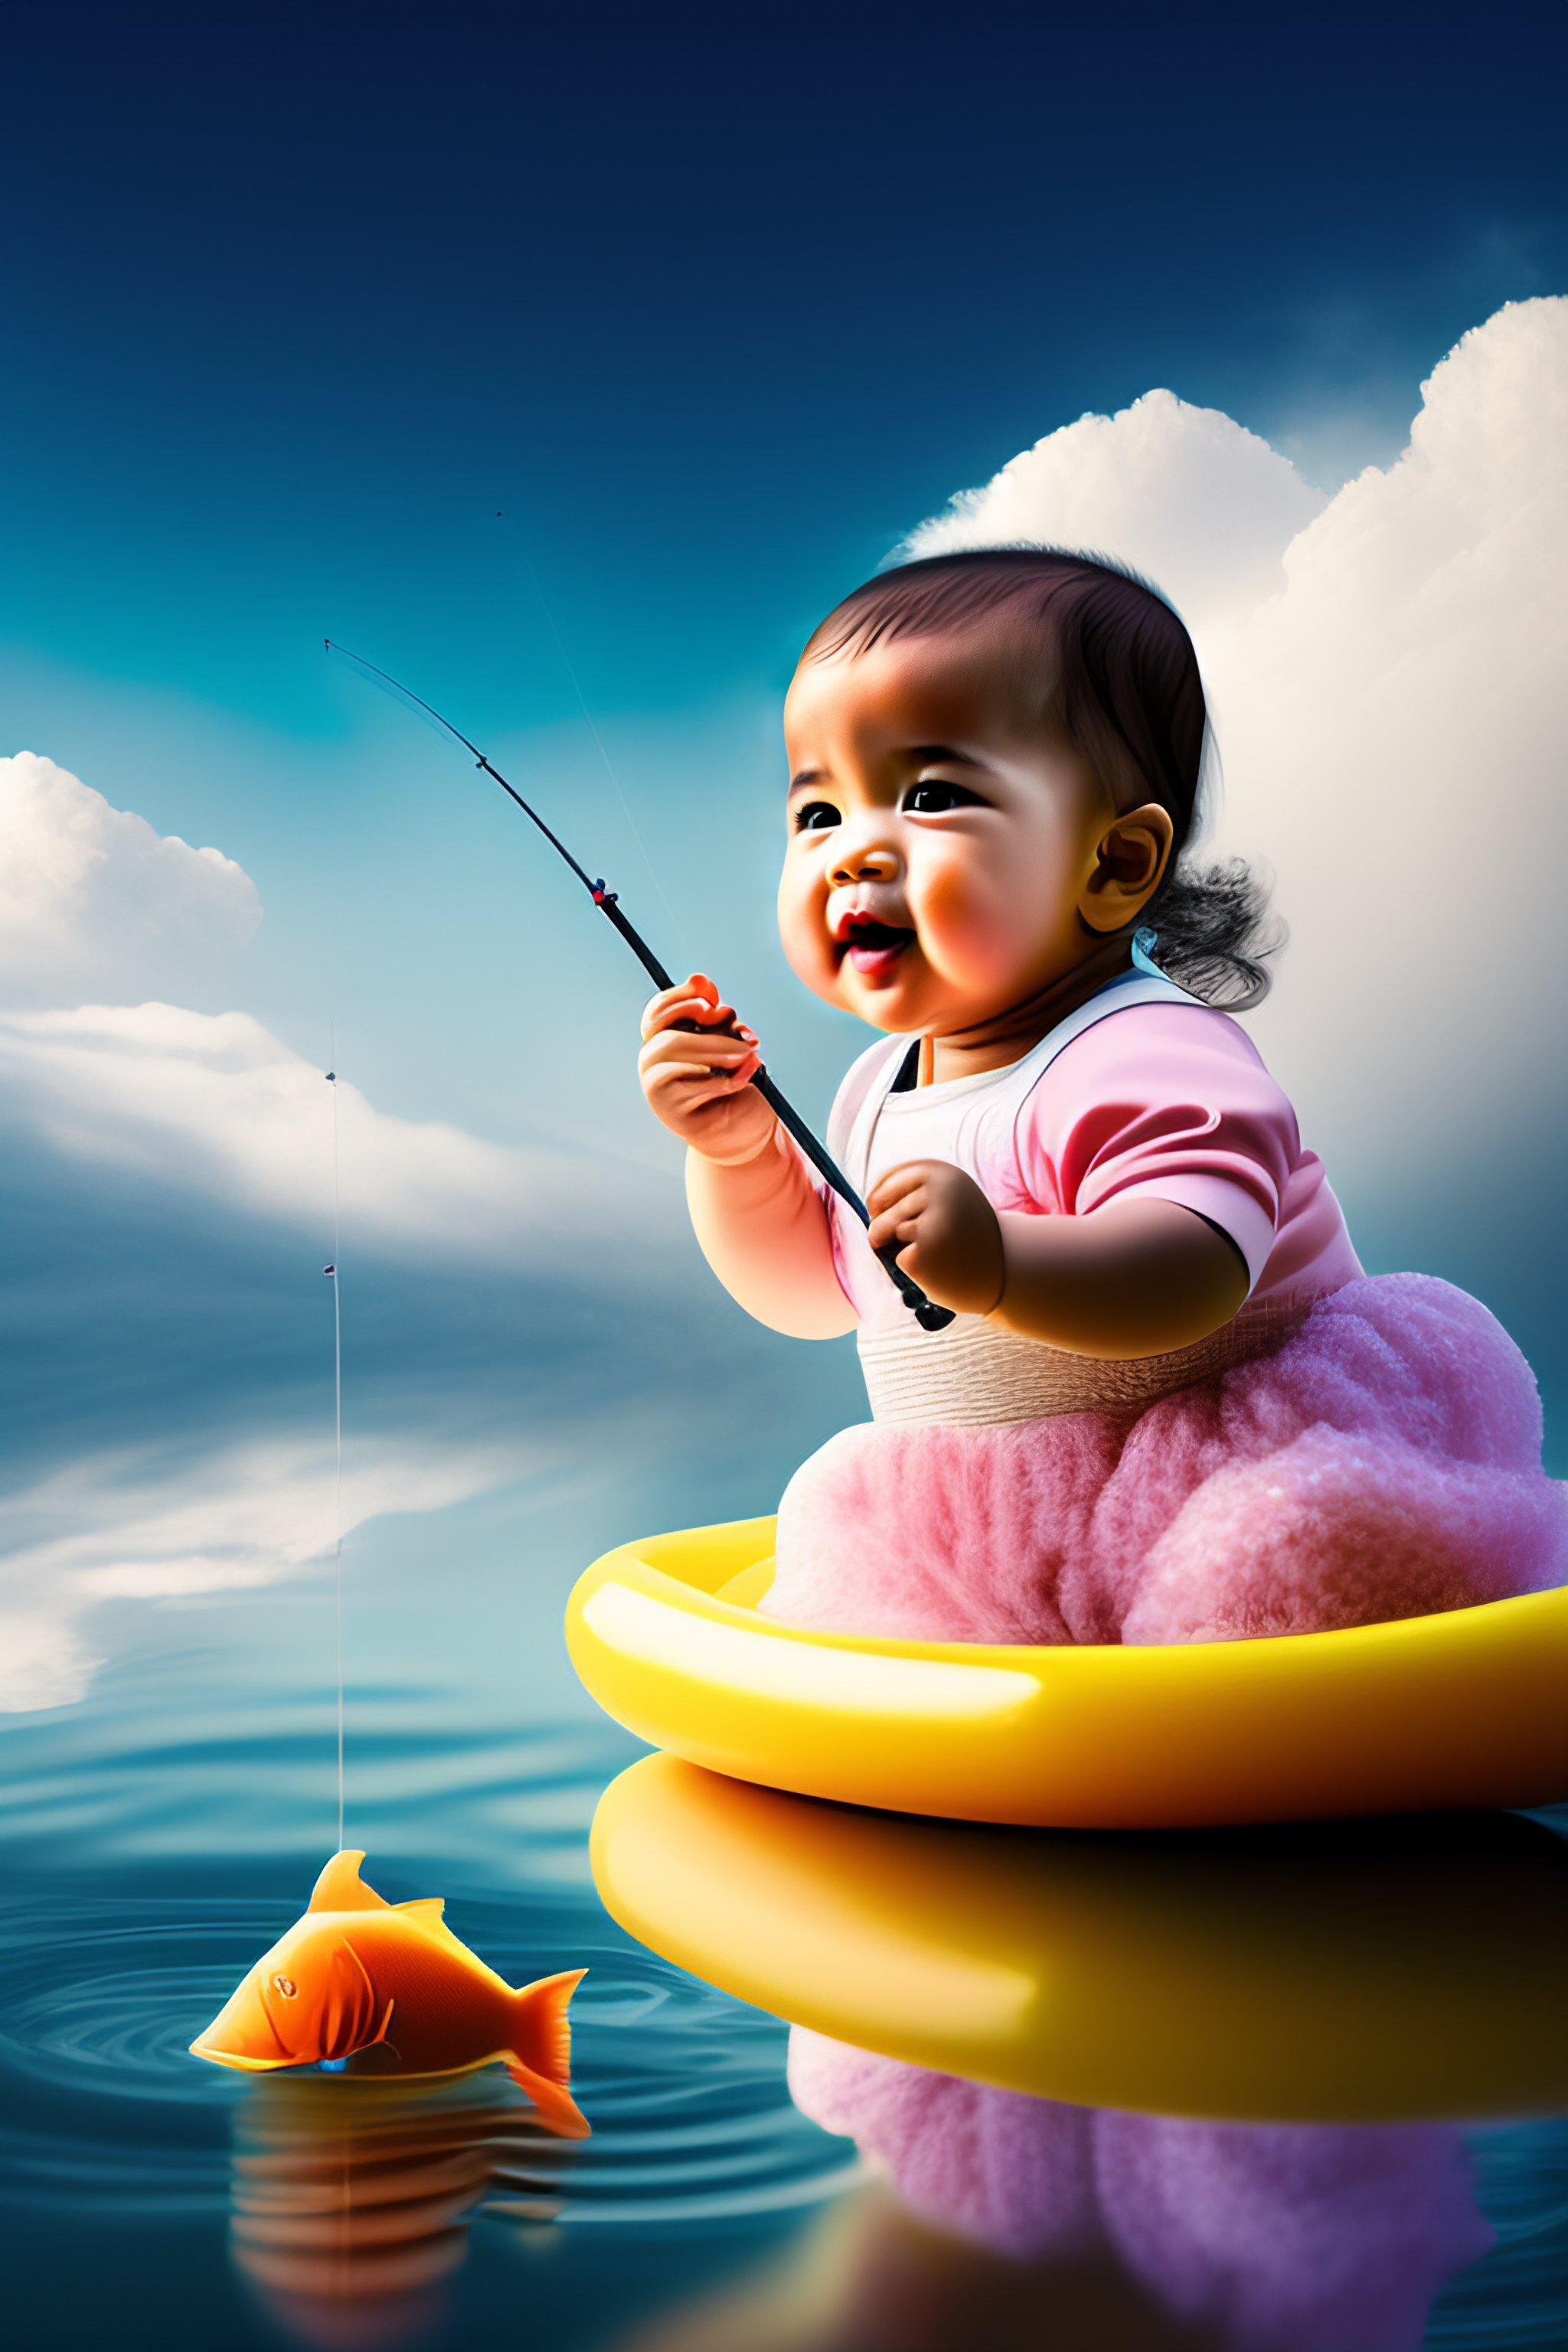 Lexica - A picture of a sweet baby girl floating on a cloud with a